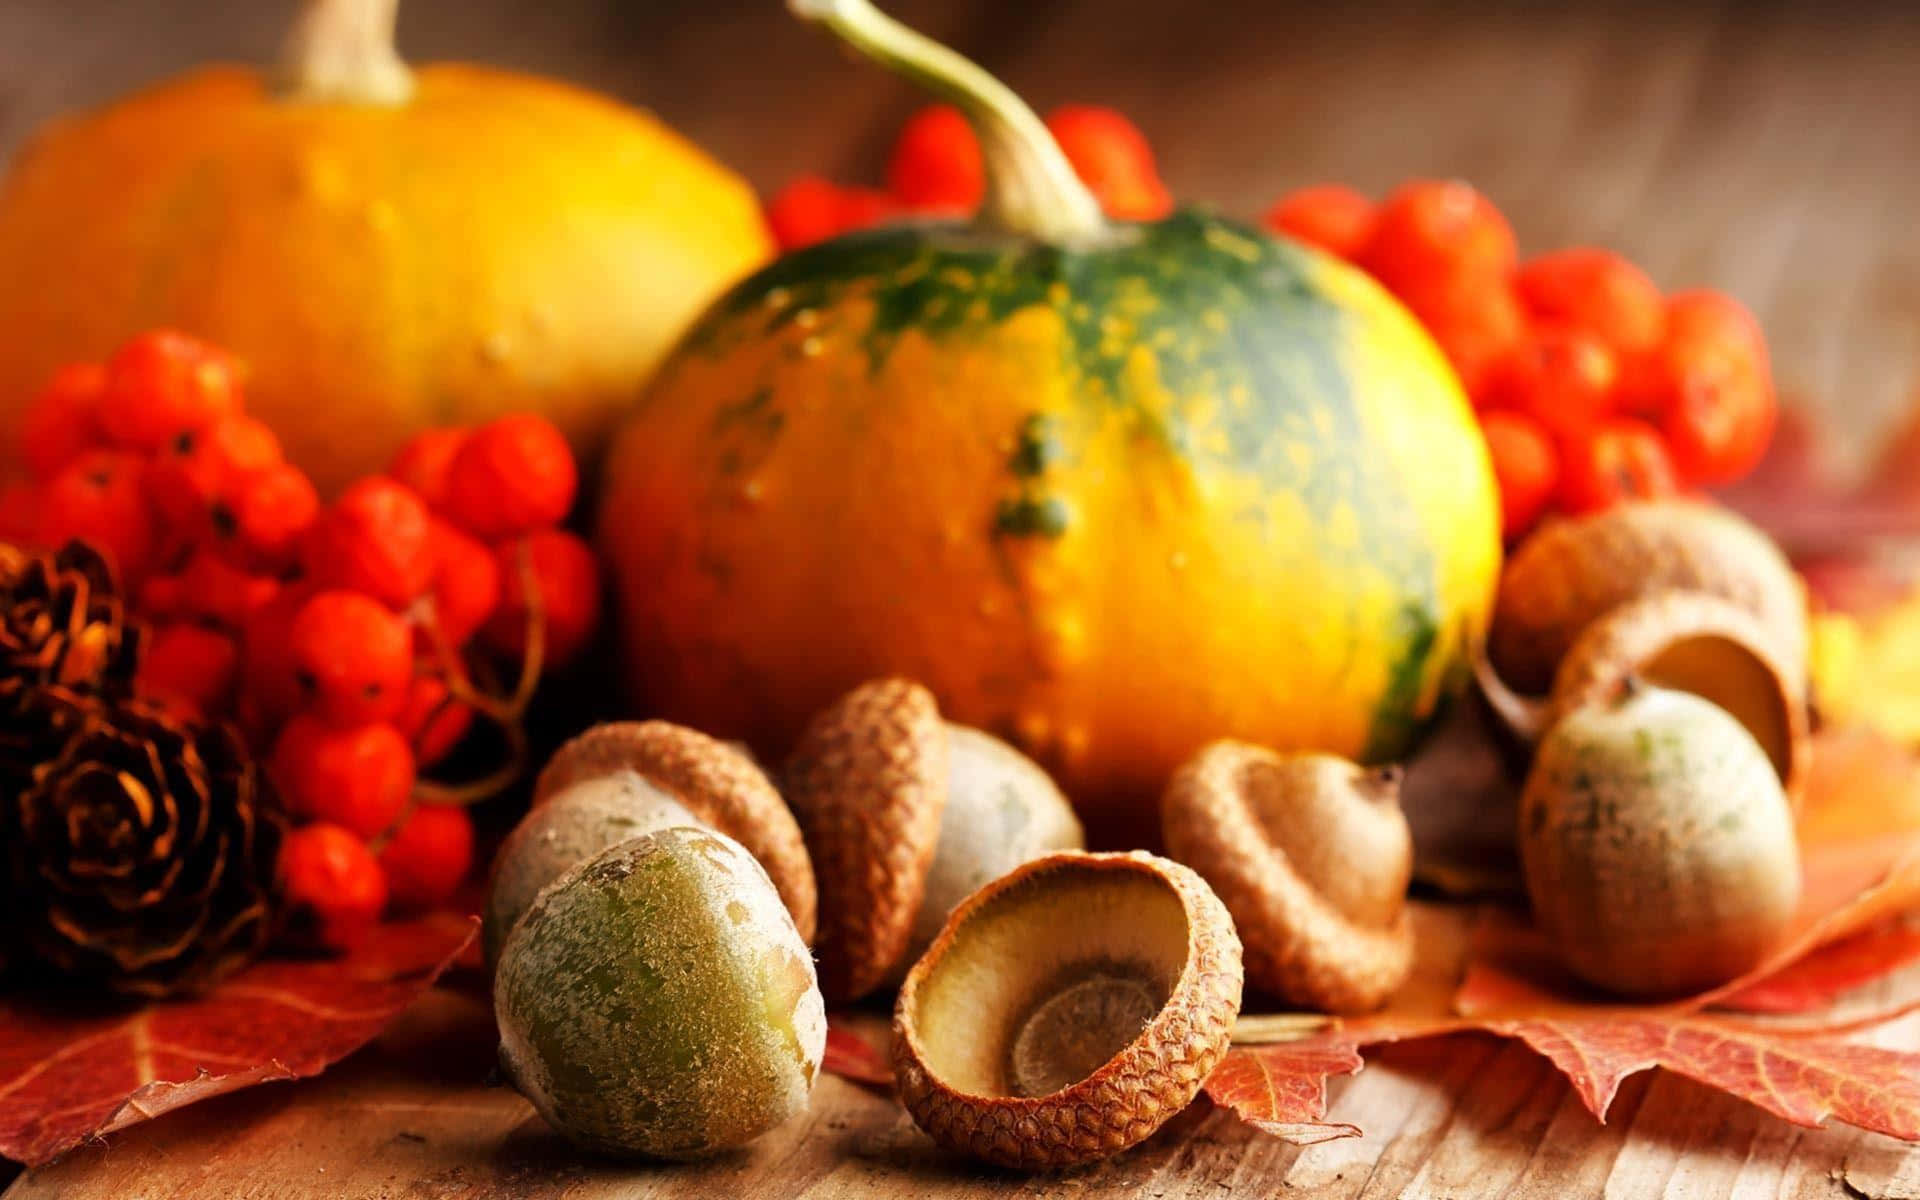 Enjoy the inviting flavors of Fall with this delicious pumpkin recipe! Wallpaper